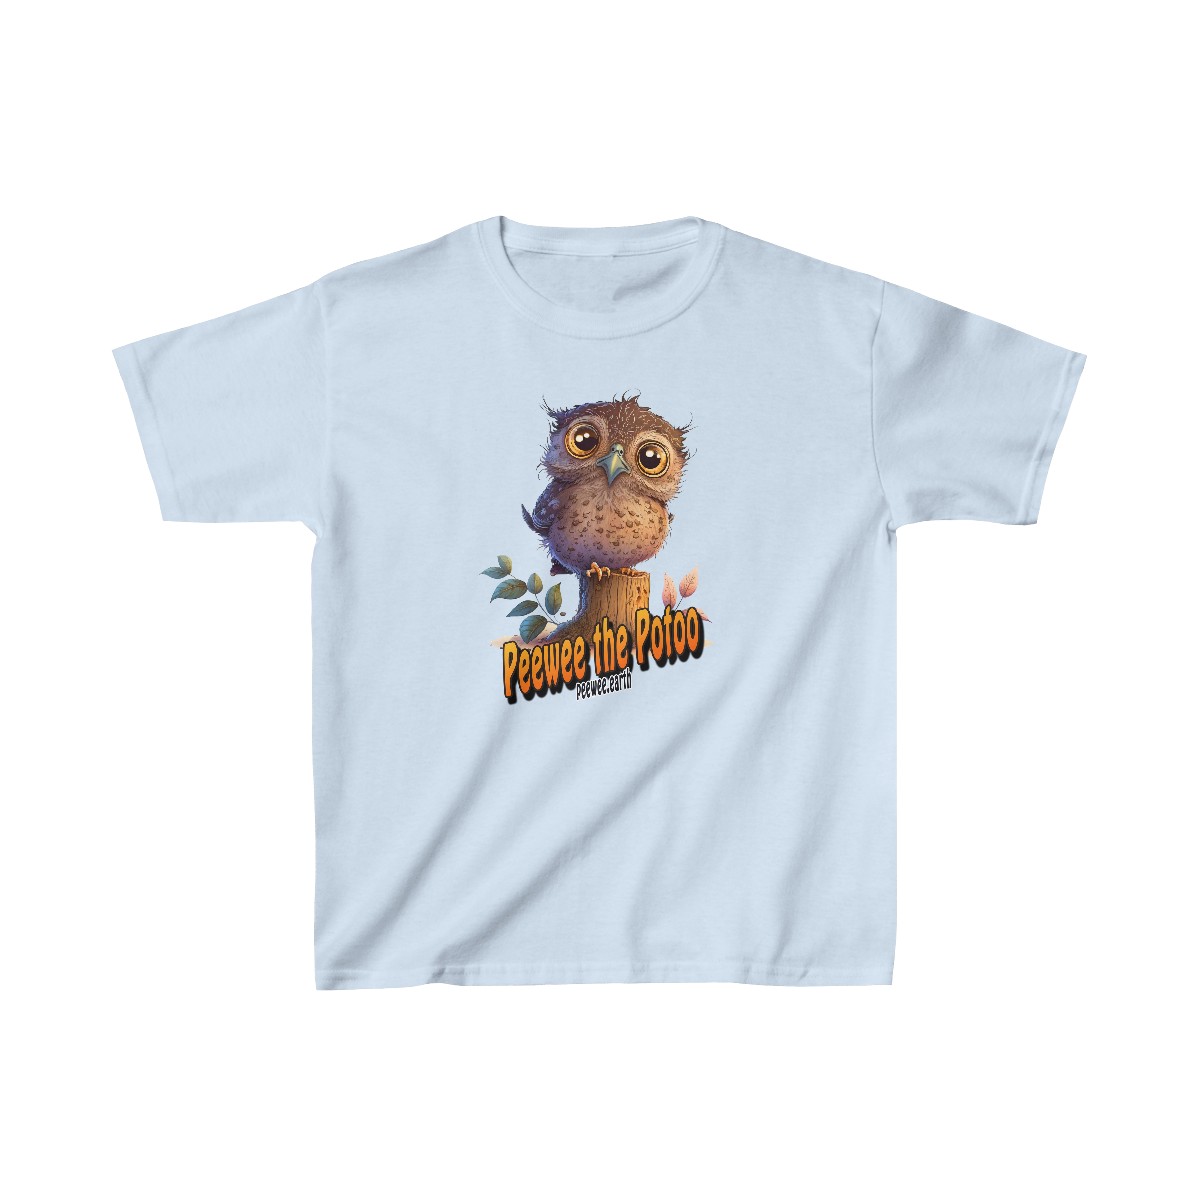 Official Peewee the Potoo youth t-shirt - Comfy Peewee product main image